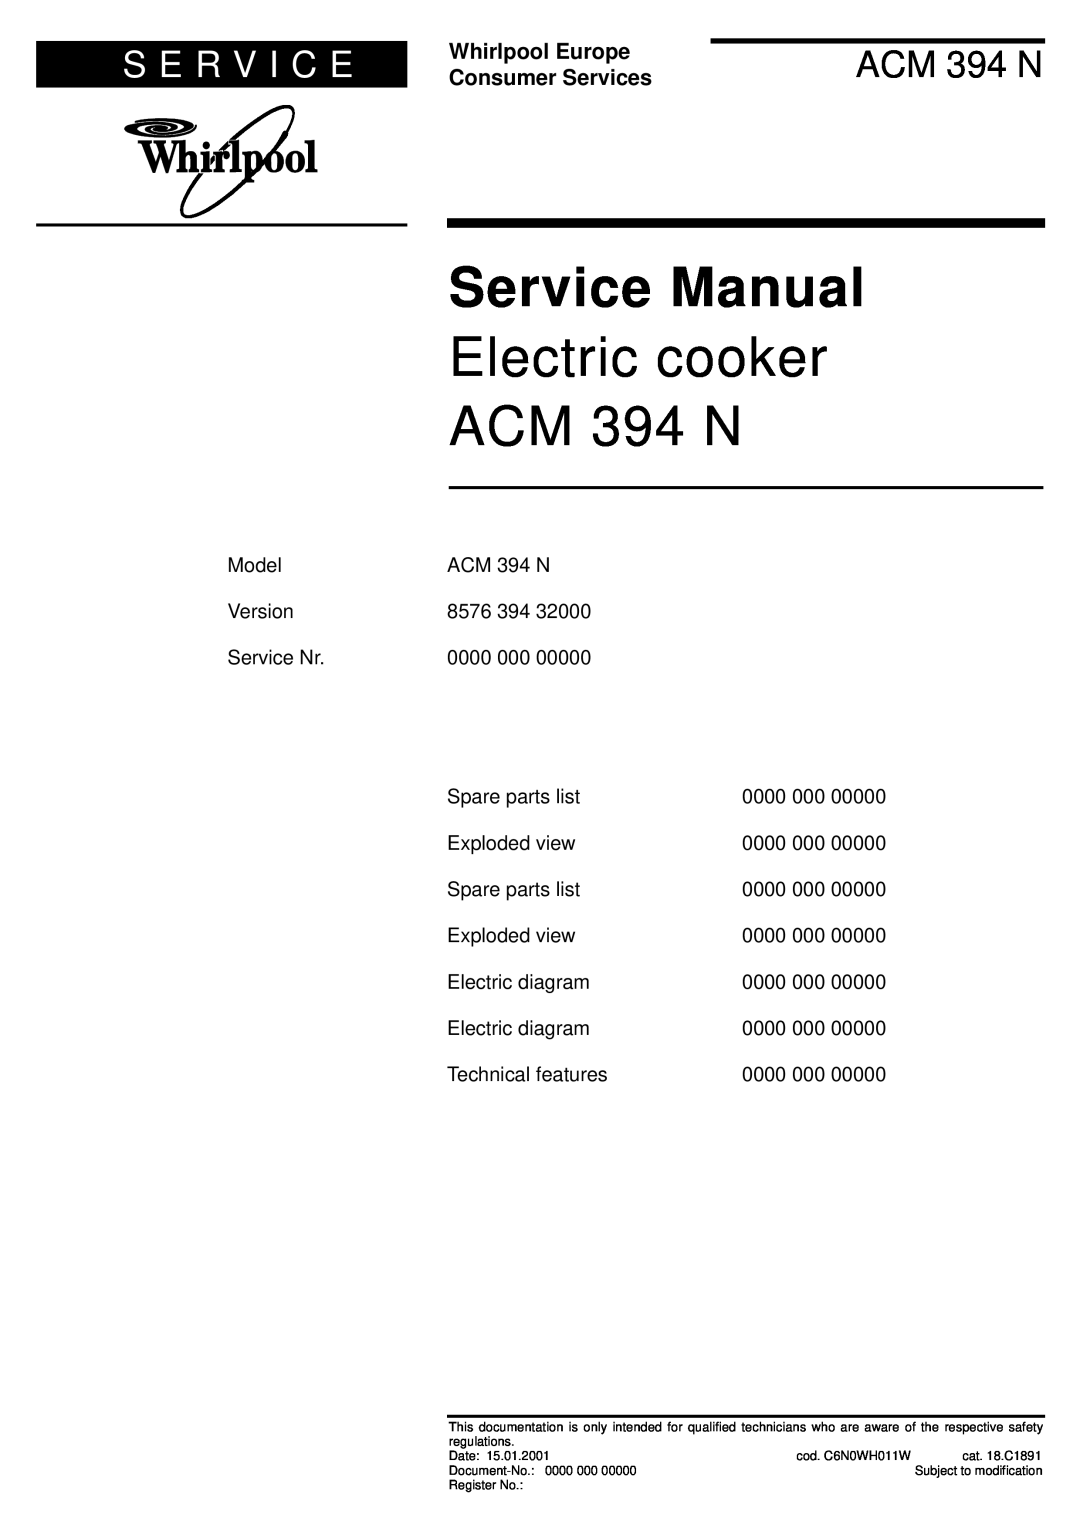 Whirlpool service manual Electric cooker ACM 394 N, S E R V I C E, Whirlpool Europe Consumer Services 